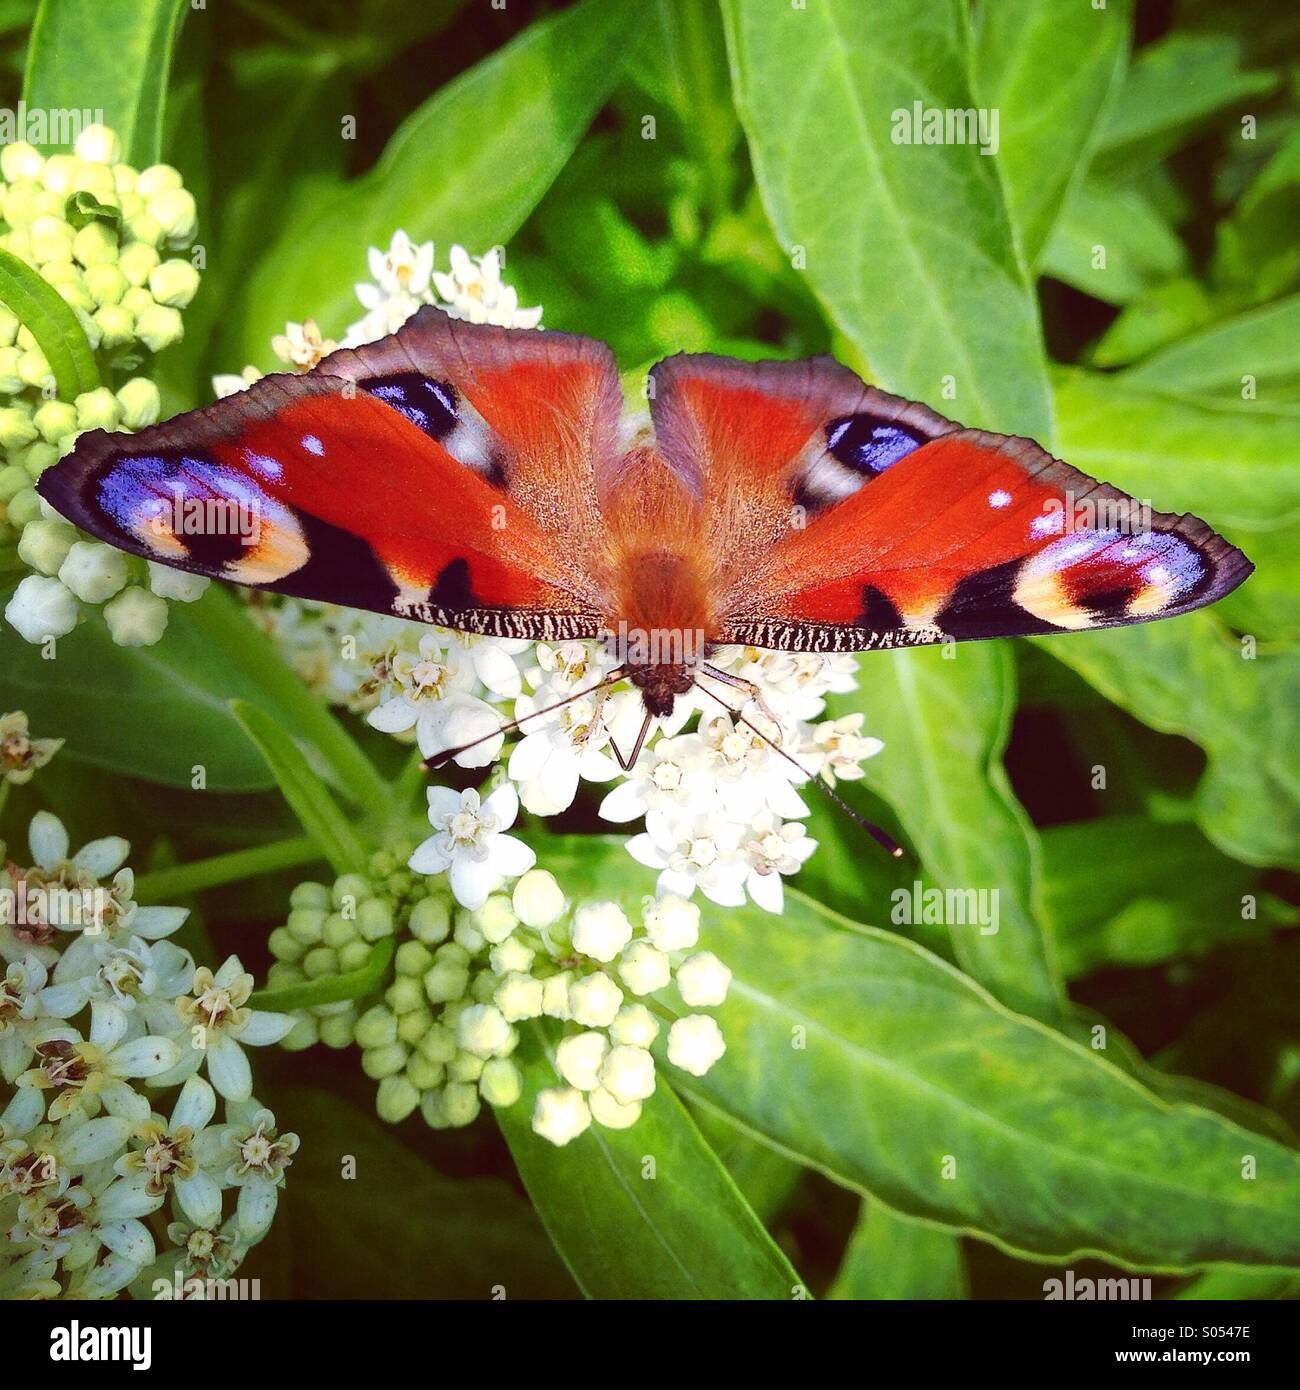 Peacock butterfly on flower Stock Photo